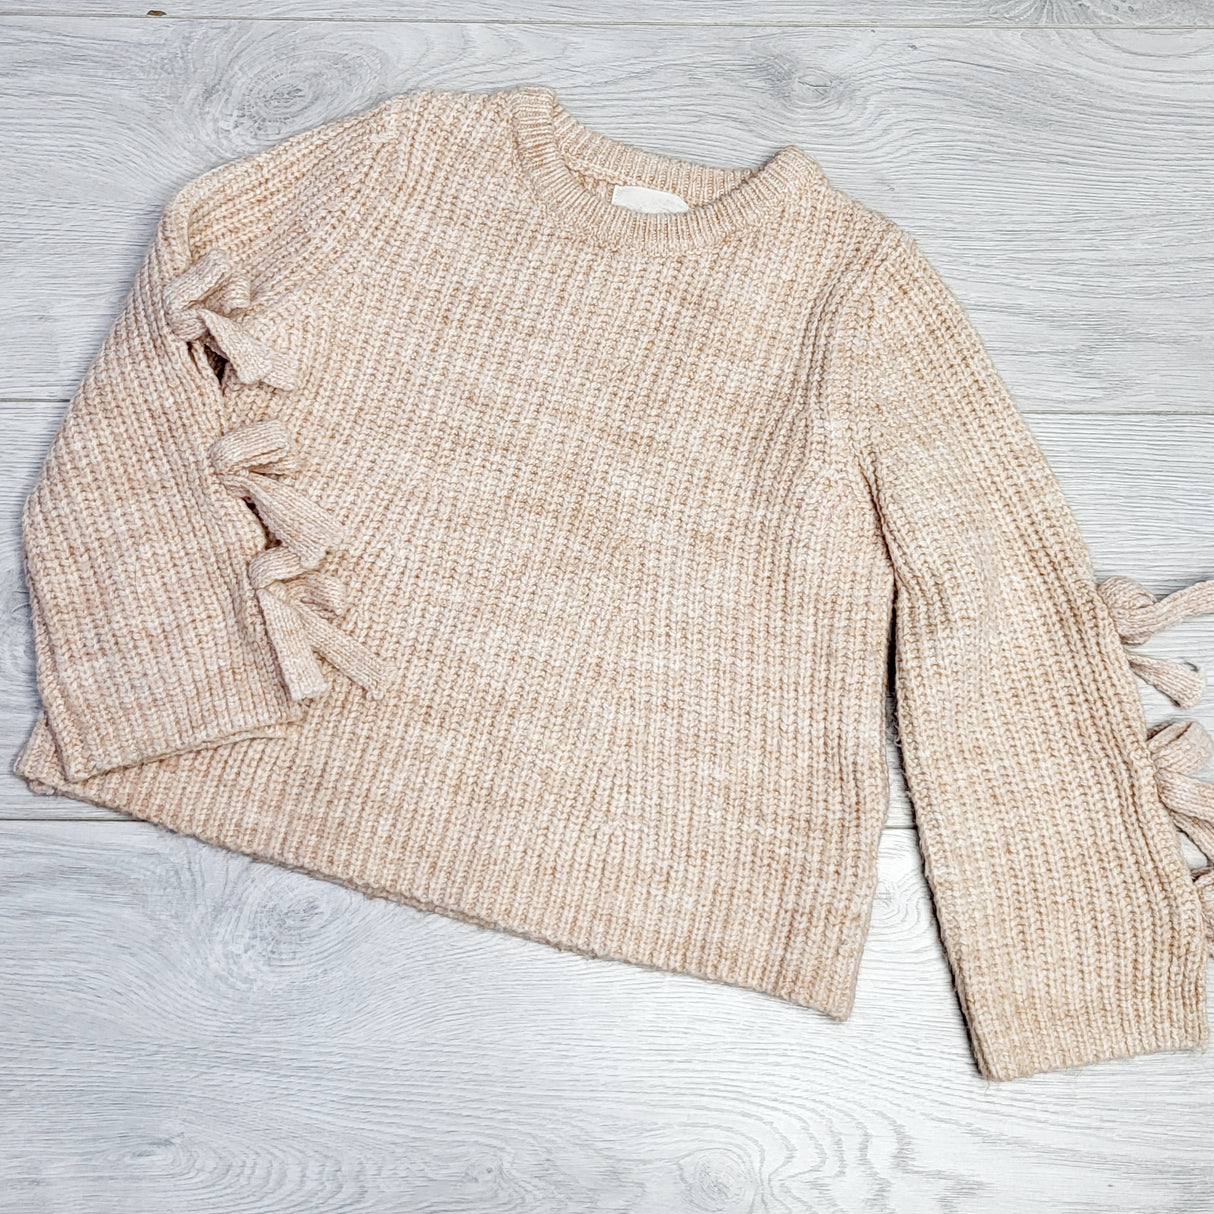 HWIL - Vignette brand sweater. Size 4T